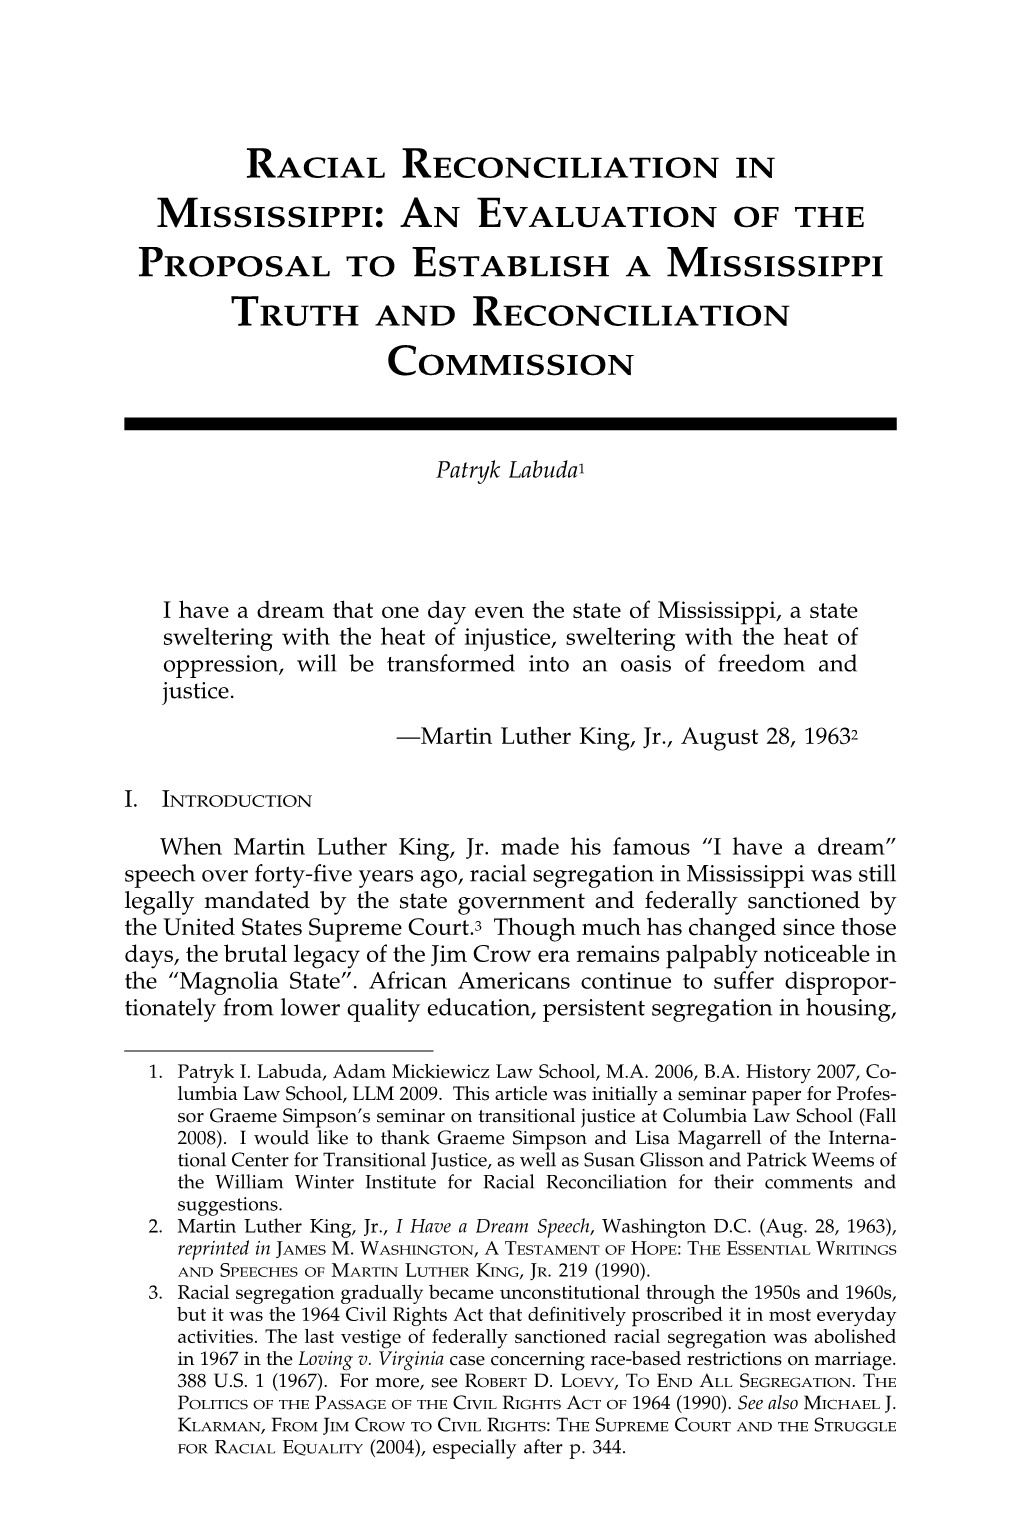 Racial Reconciliation in Mississippi: an Evaluation of the Proposal to Establish a Mississippi Truth and Reconciliation Commission